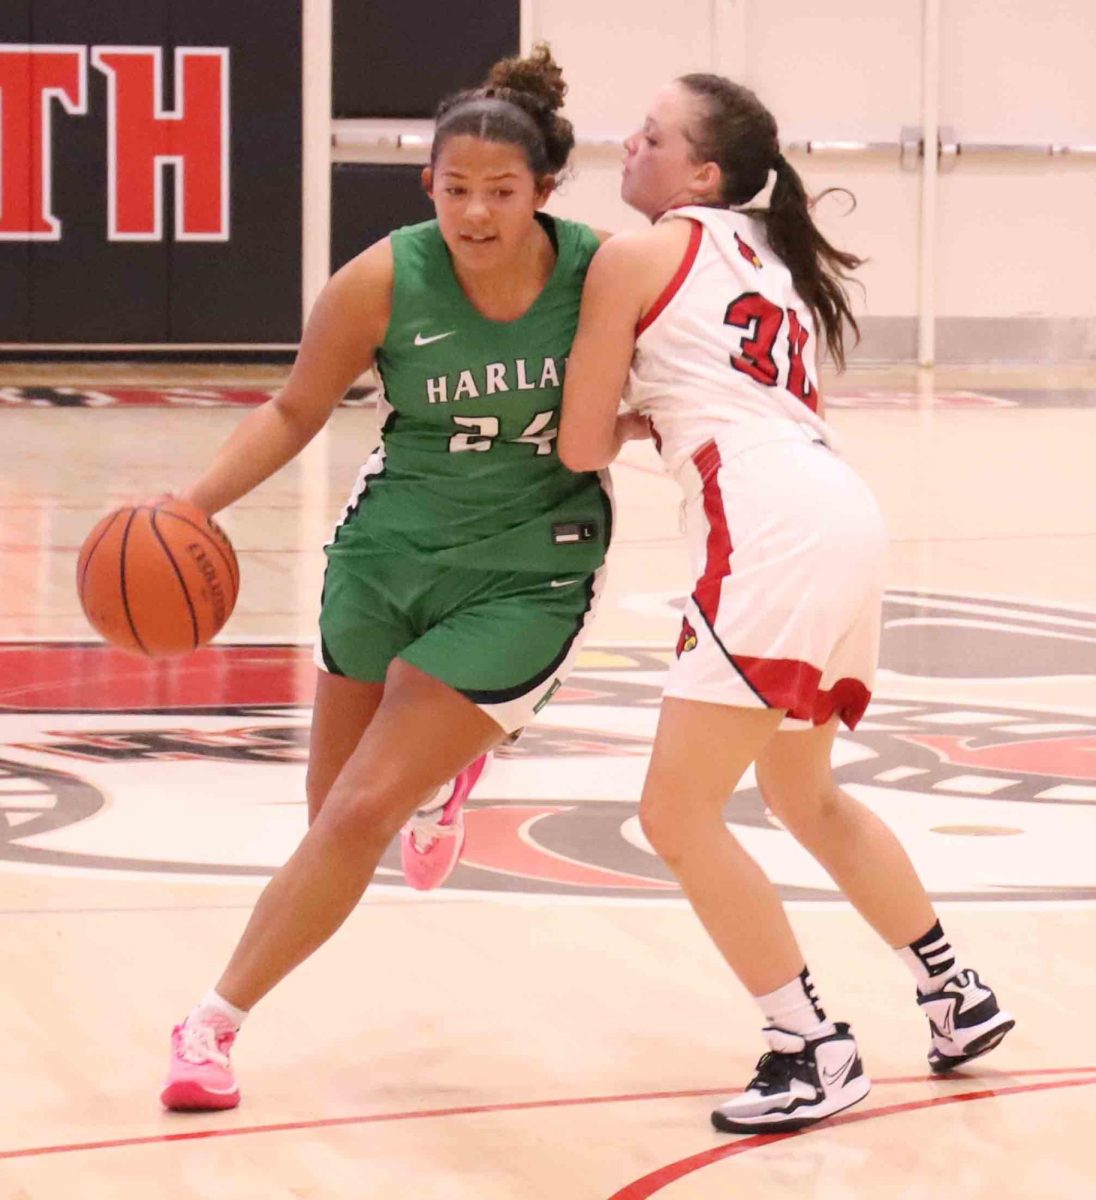 Harlan junior guard Aymanni Wynn, pictured in action earlier this season, scored 23 points on Tuesday in the Lady Dragons 71-47 win at Barbourville.